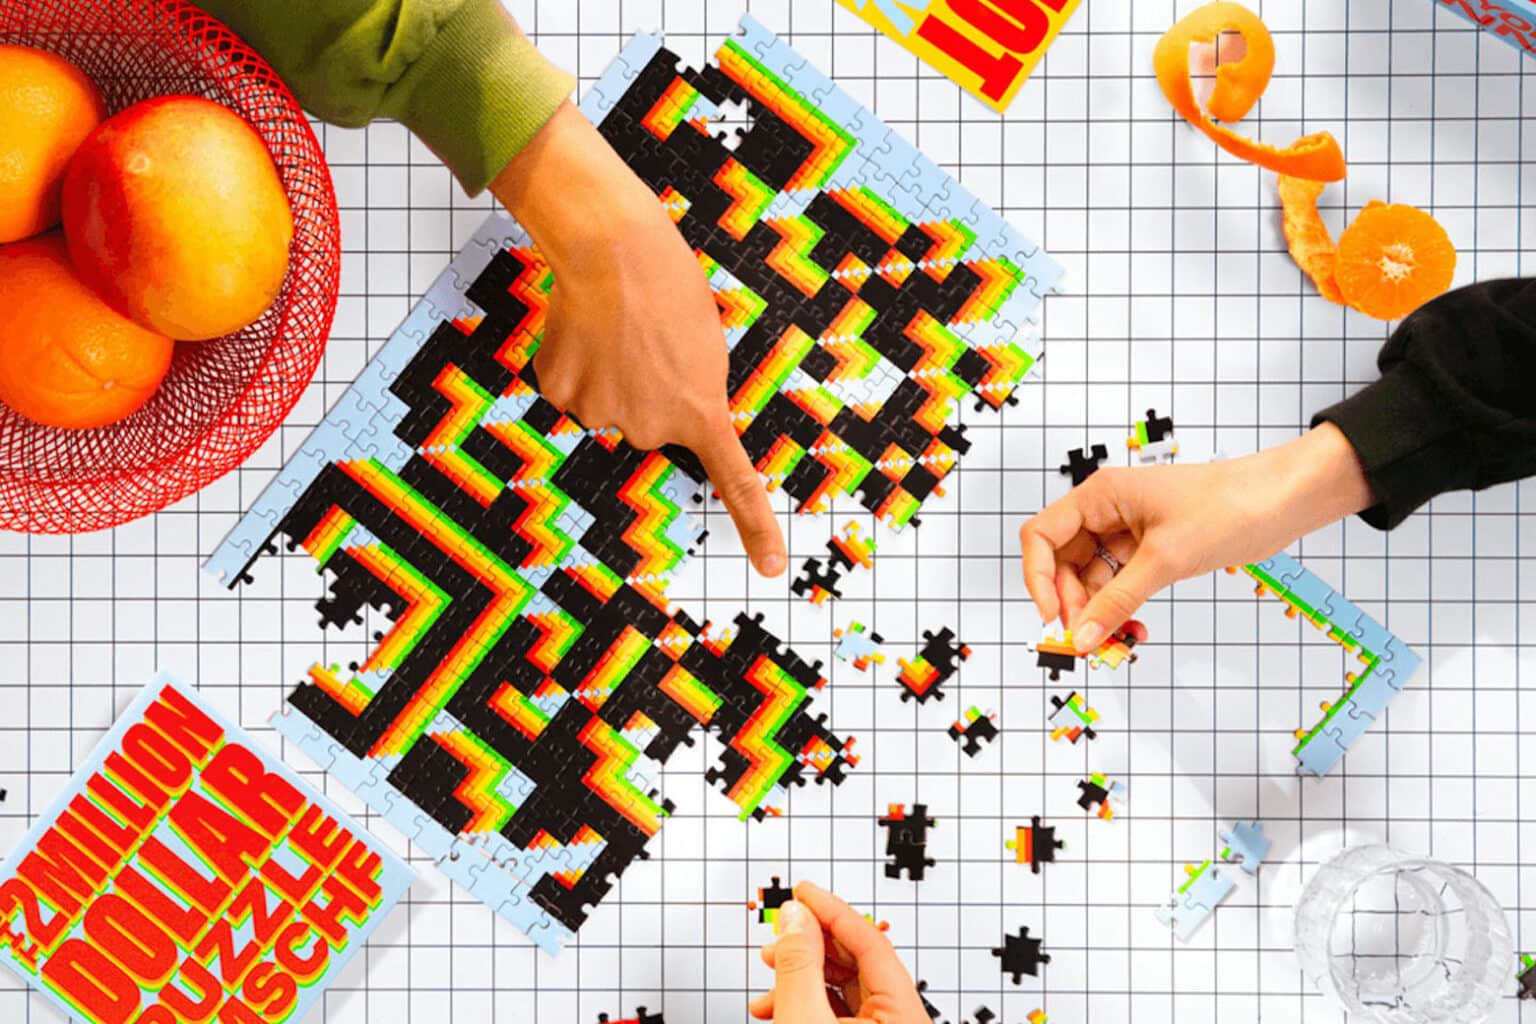 Win up to $1 million for celebrating National Puzzle Day.